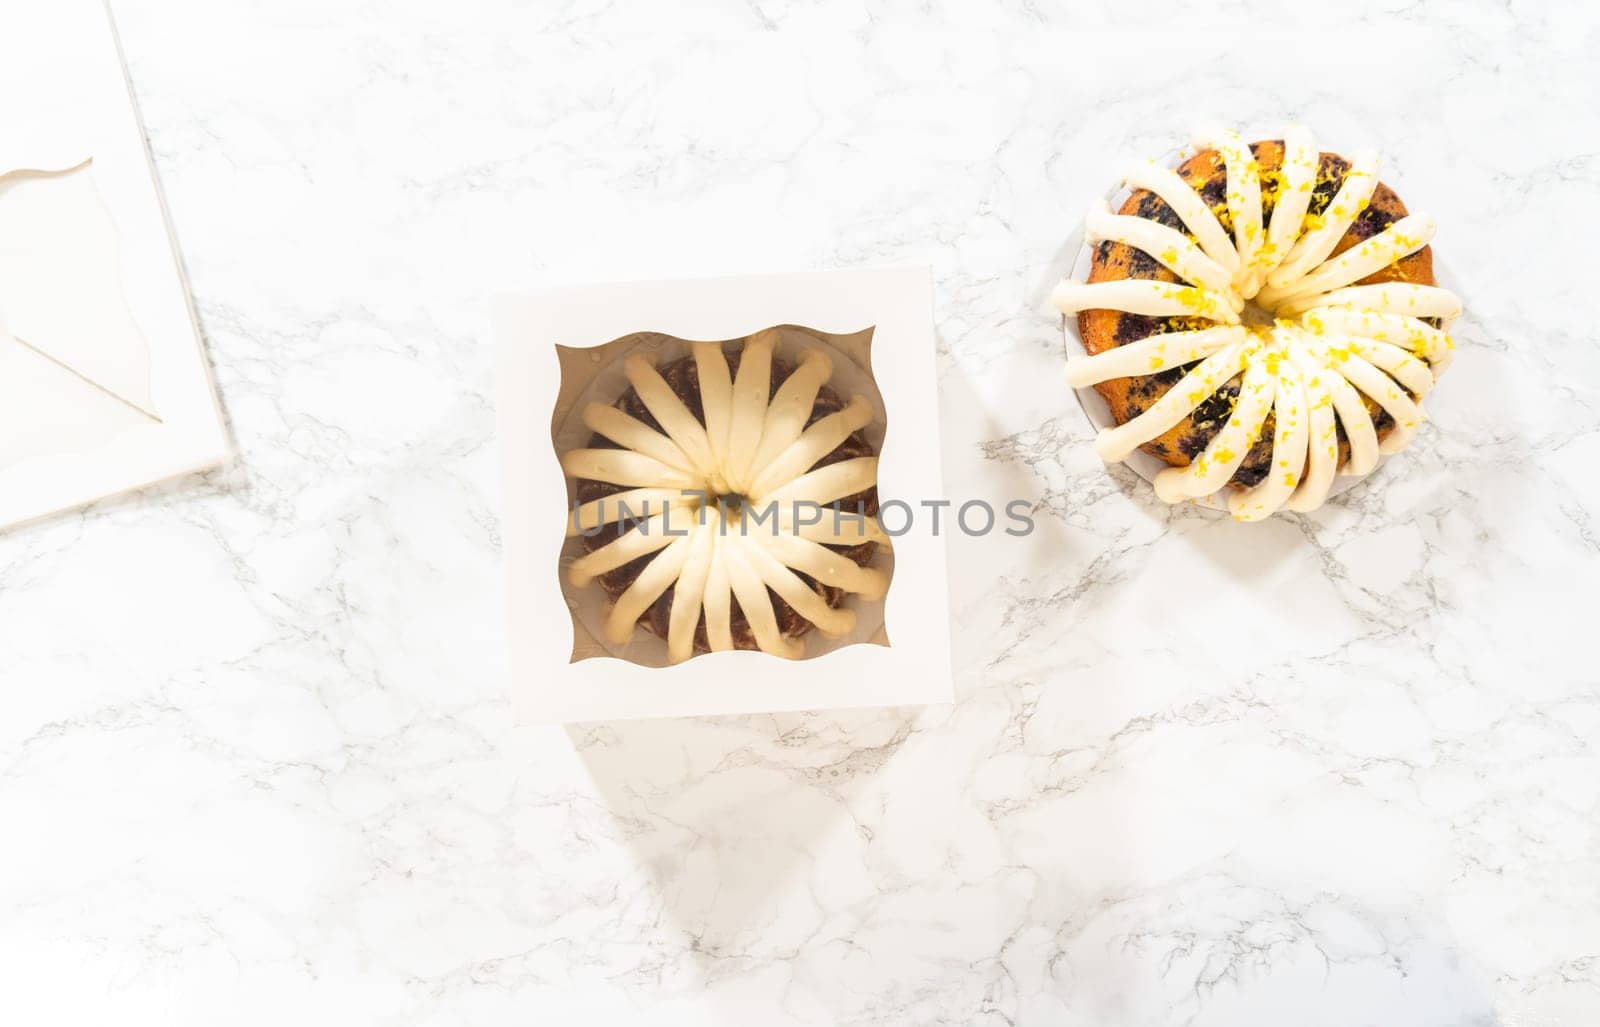 Flat lay. The freshly baked bundt cakes are carefully nestled into white paper boxes, preparing them for secure transportation while maintaining their delectable appearance.